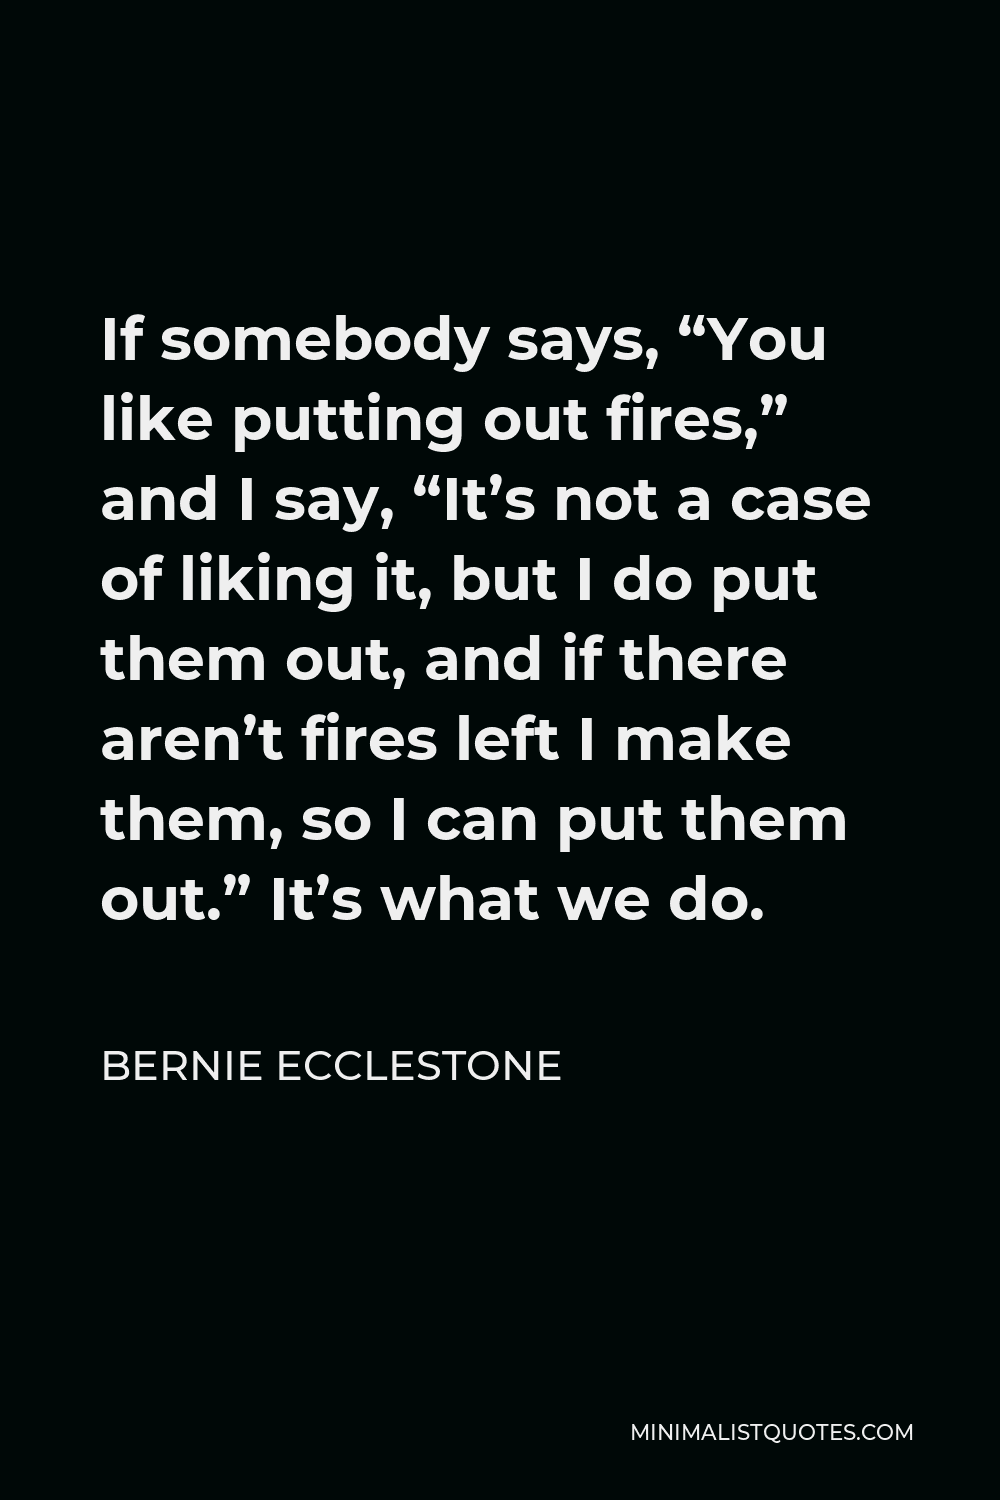 Bernie Ecclestone Quote - If somebody says, “You like putting out fires,” and I say, “It’s not a case of liking it, but I do put them out, and if there aren’t fires left I make them, so I can put them out.” It’s what we do.